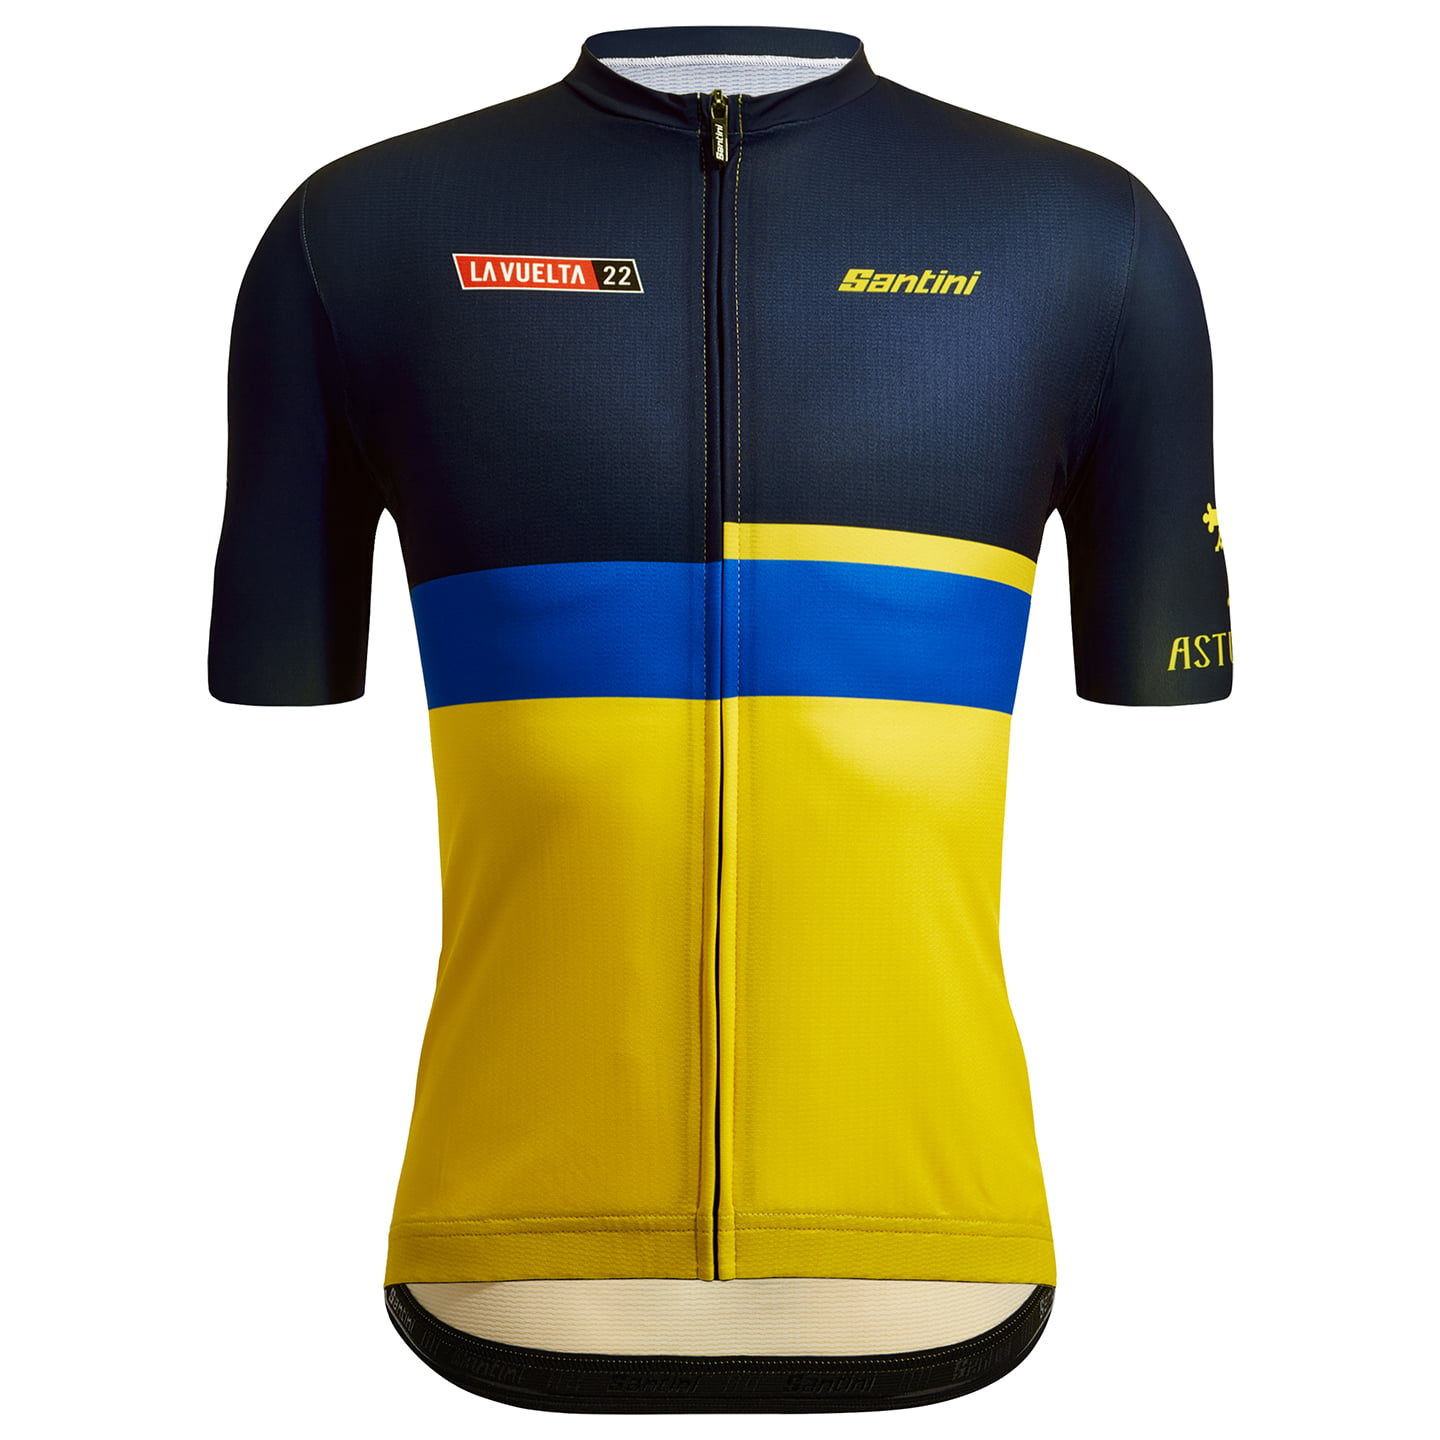 LA VUELTA Asturias 2022 Short Sleeve Jersey, for men, size M, Cycle jersey, Cycling clothing